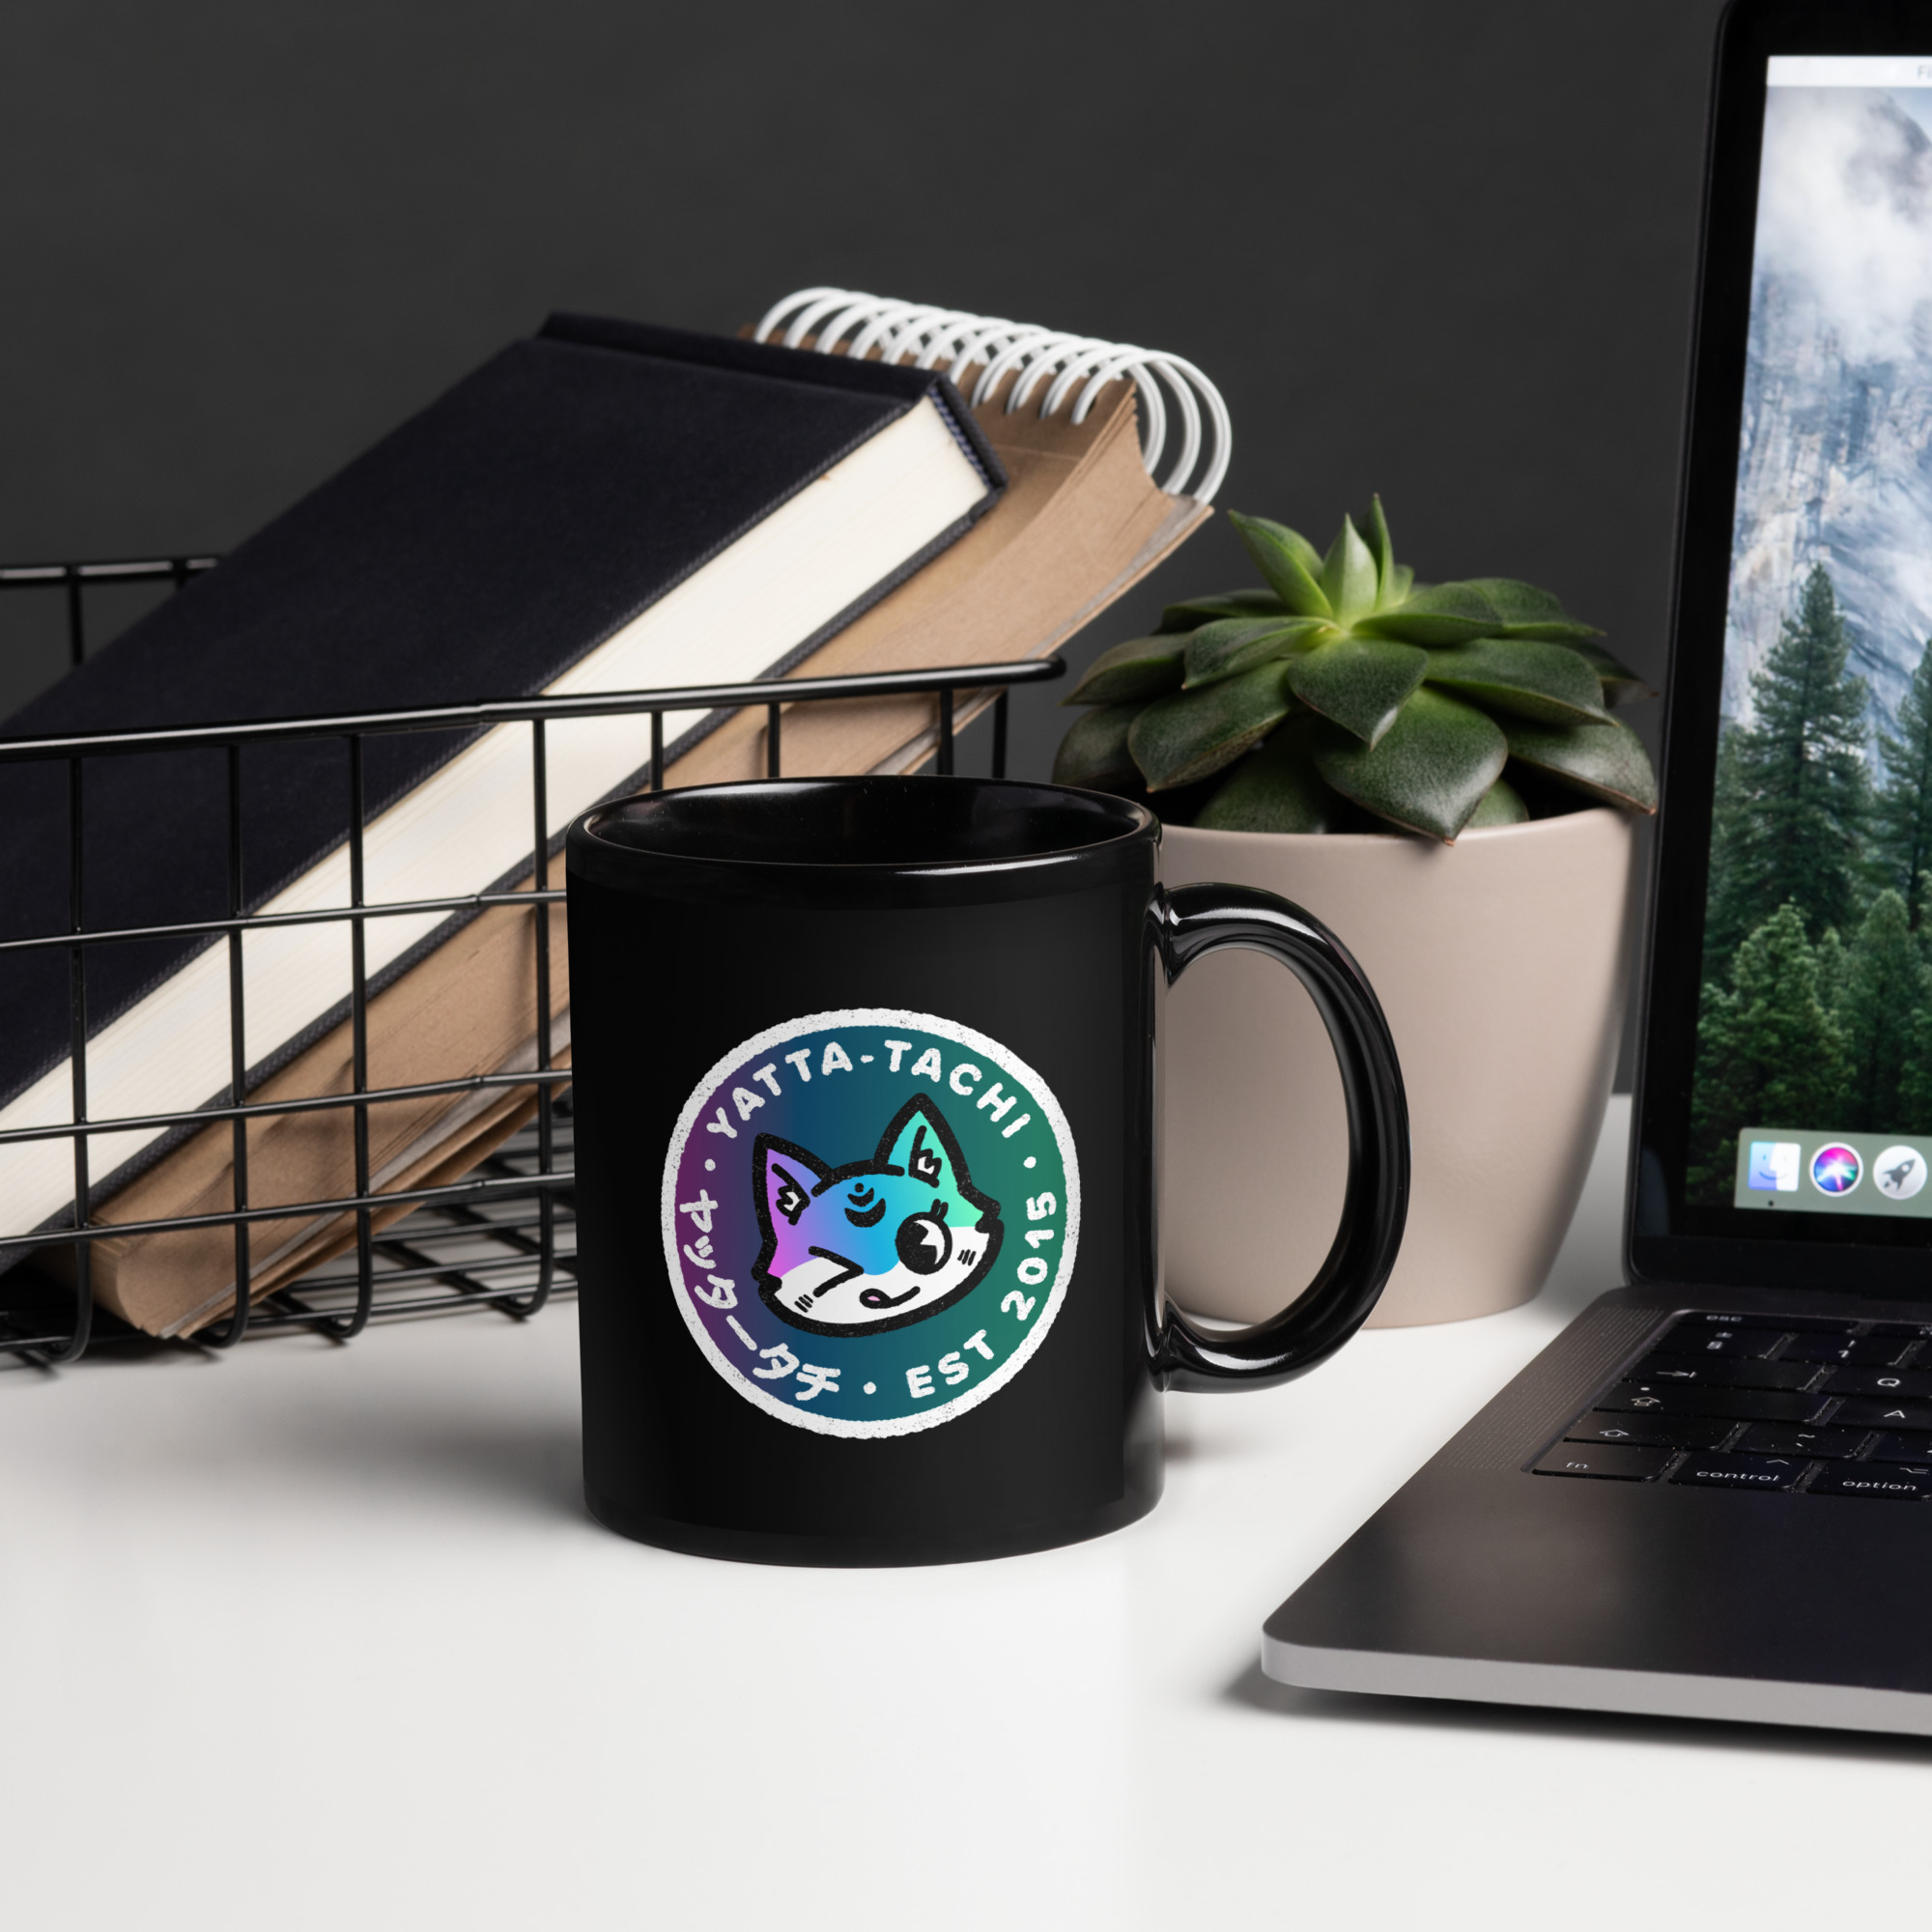 A black coffee cup with one of Yatta-Tachi's emblem on it hitting on a table next to a laptop and office decor.